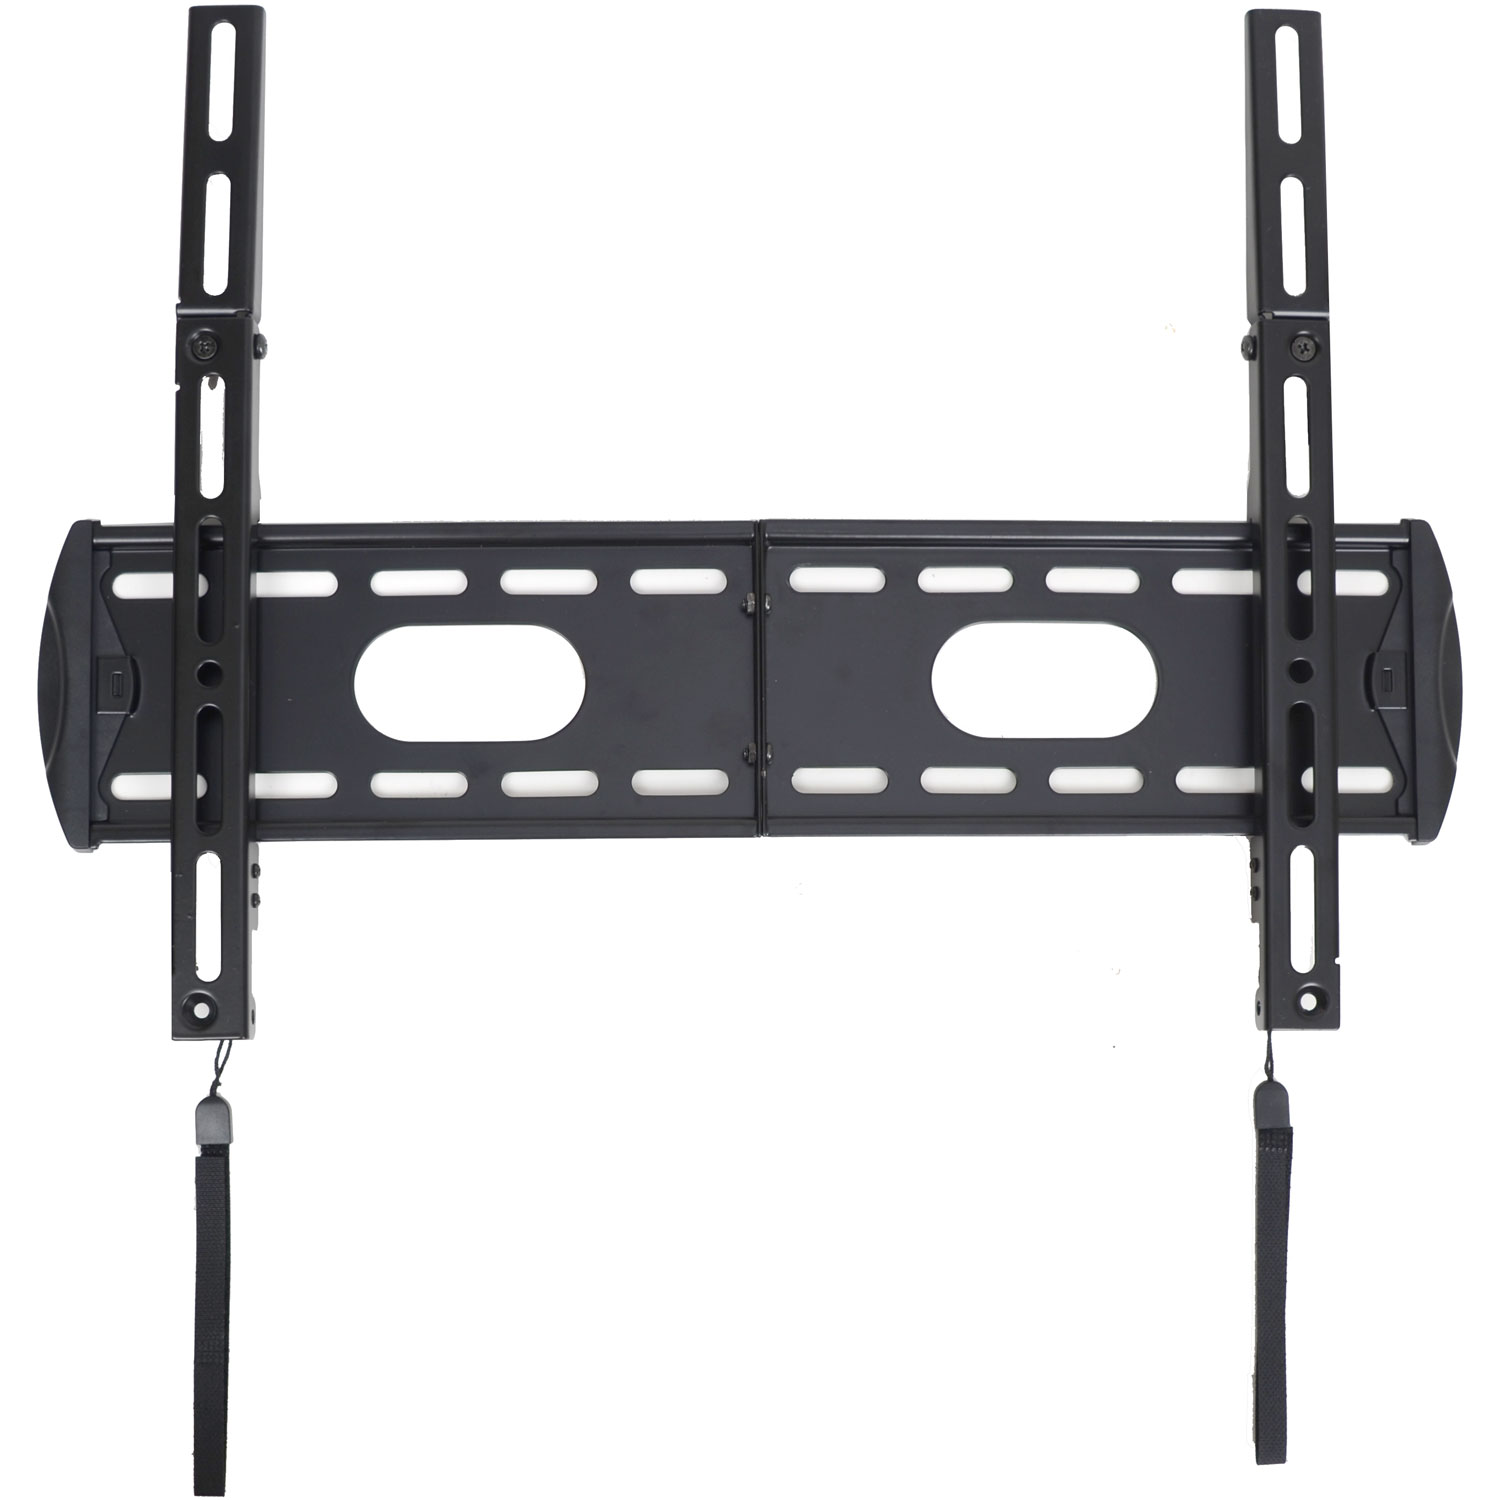 VideoSecu Ultra Slim TV Wall Mount for 27 28 29 32 39 40 42 43 46 47 48" LCD Plasma Some LED 50" Flat Panel Screen bia - image 3 of 4